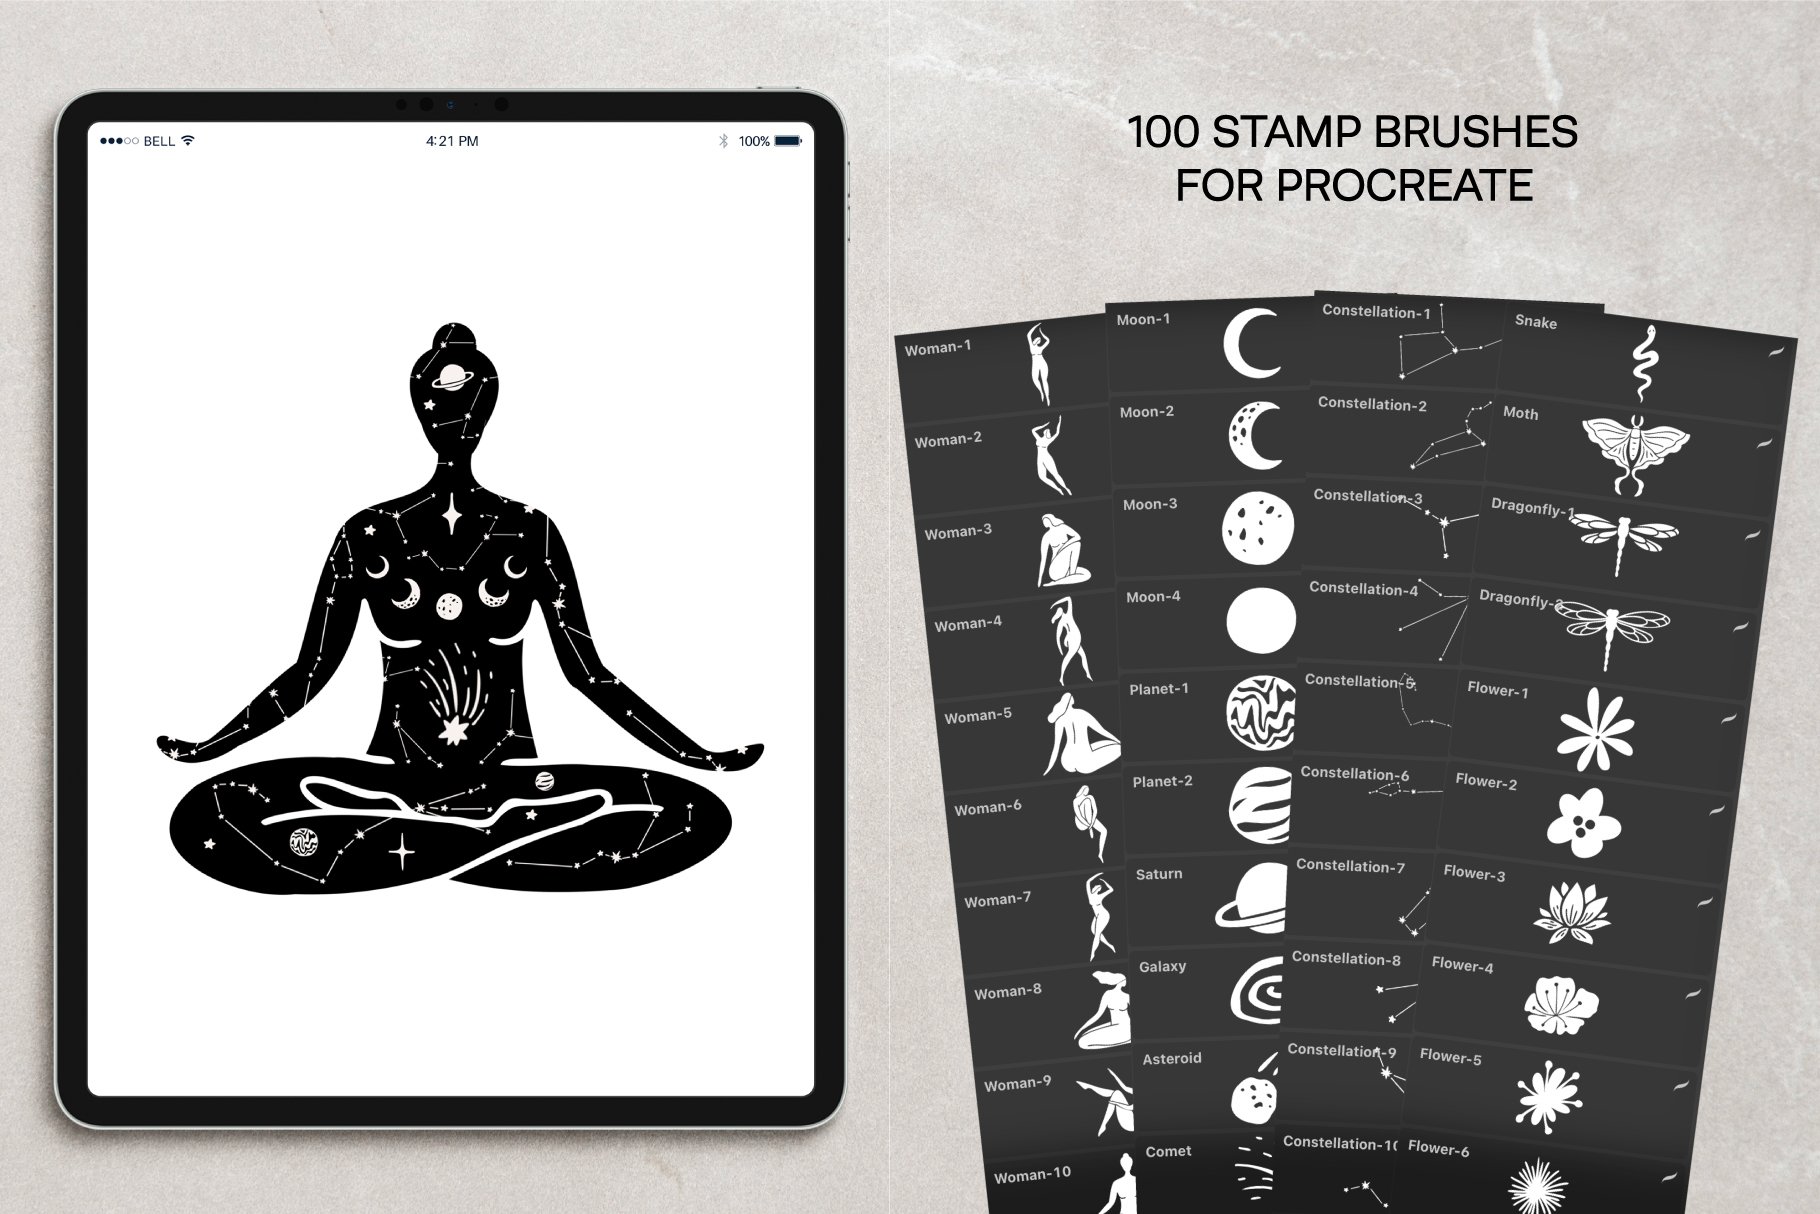 celestial woman stamp brushes 5 793